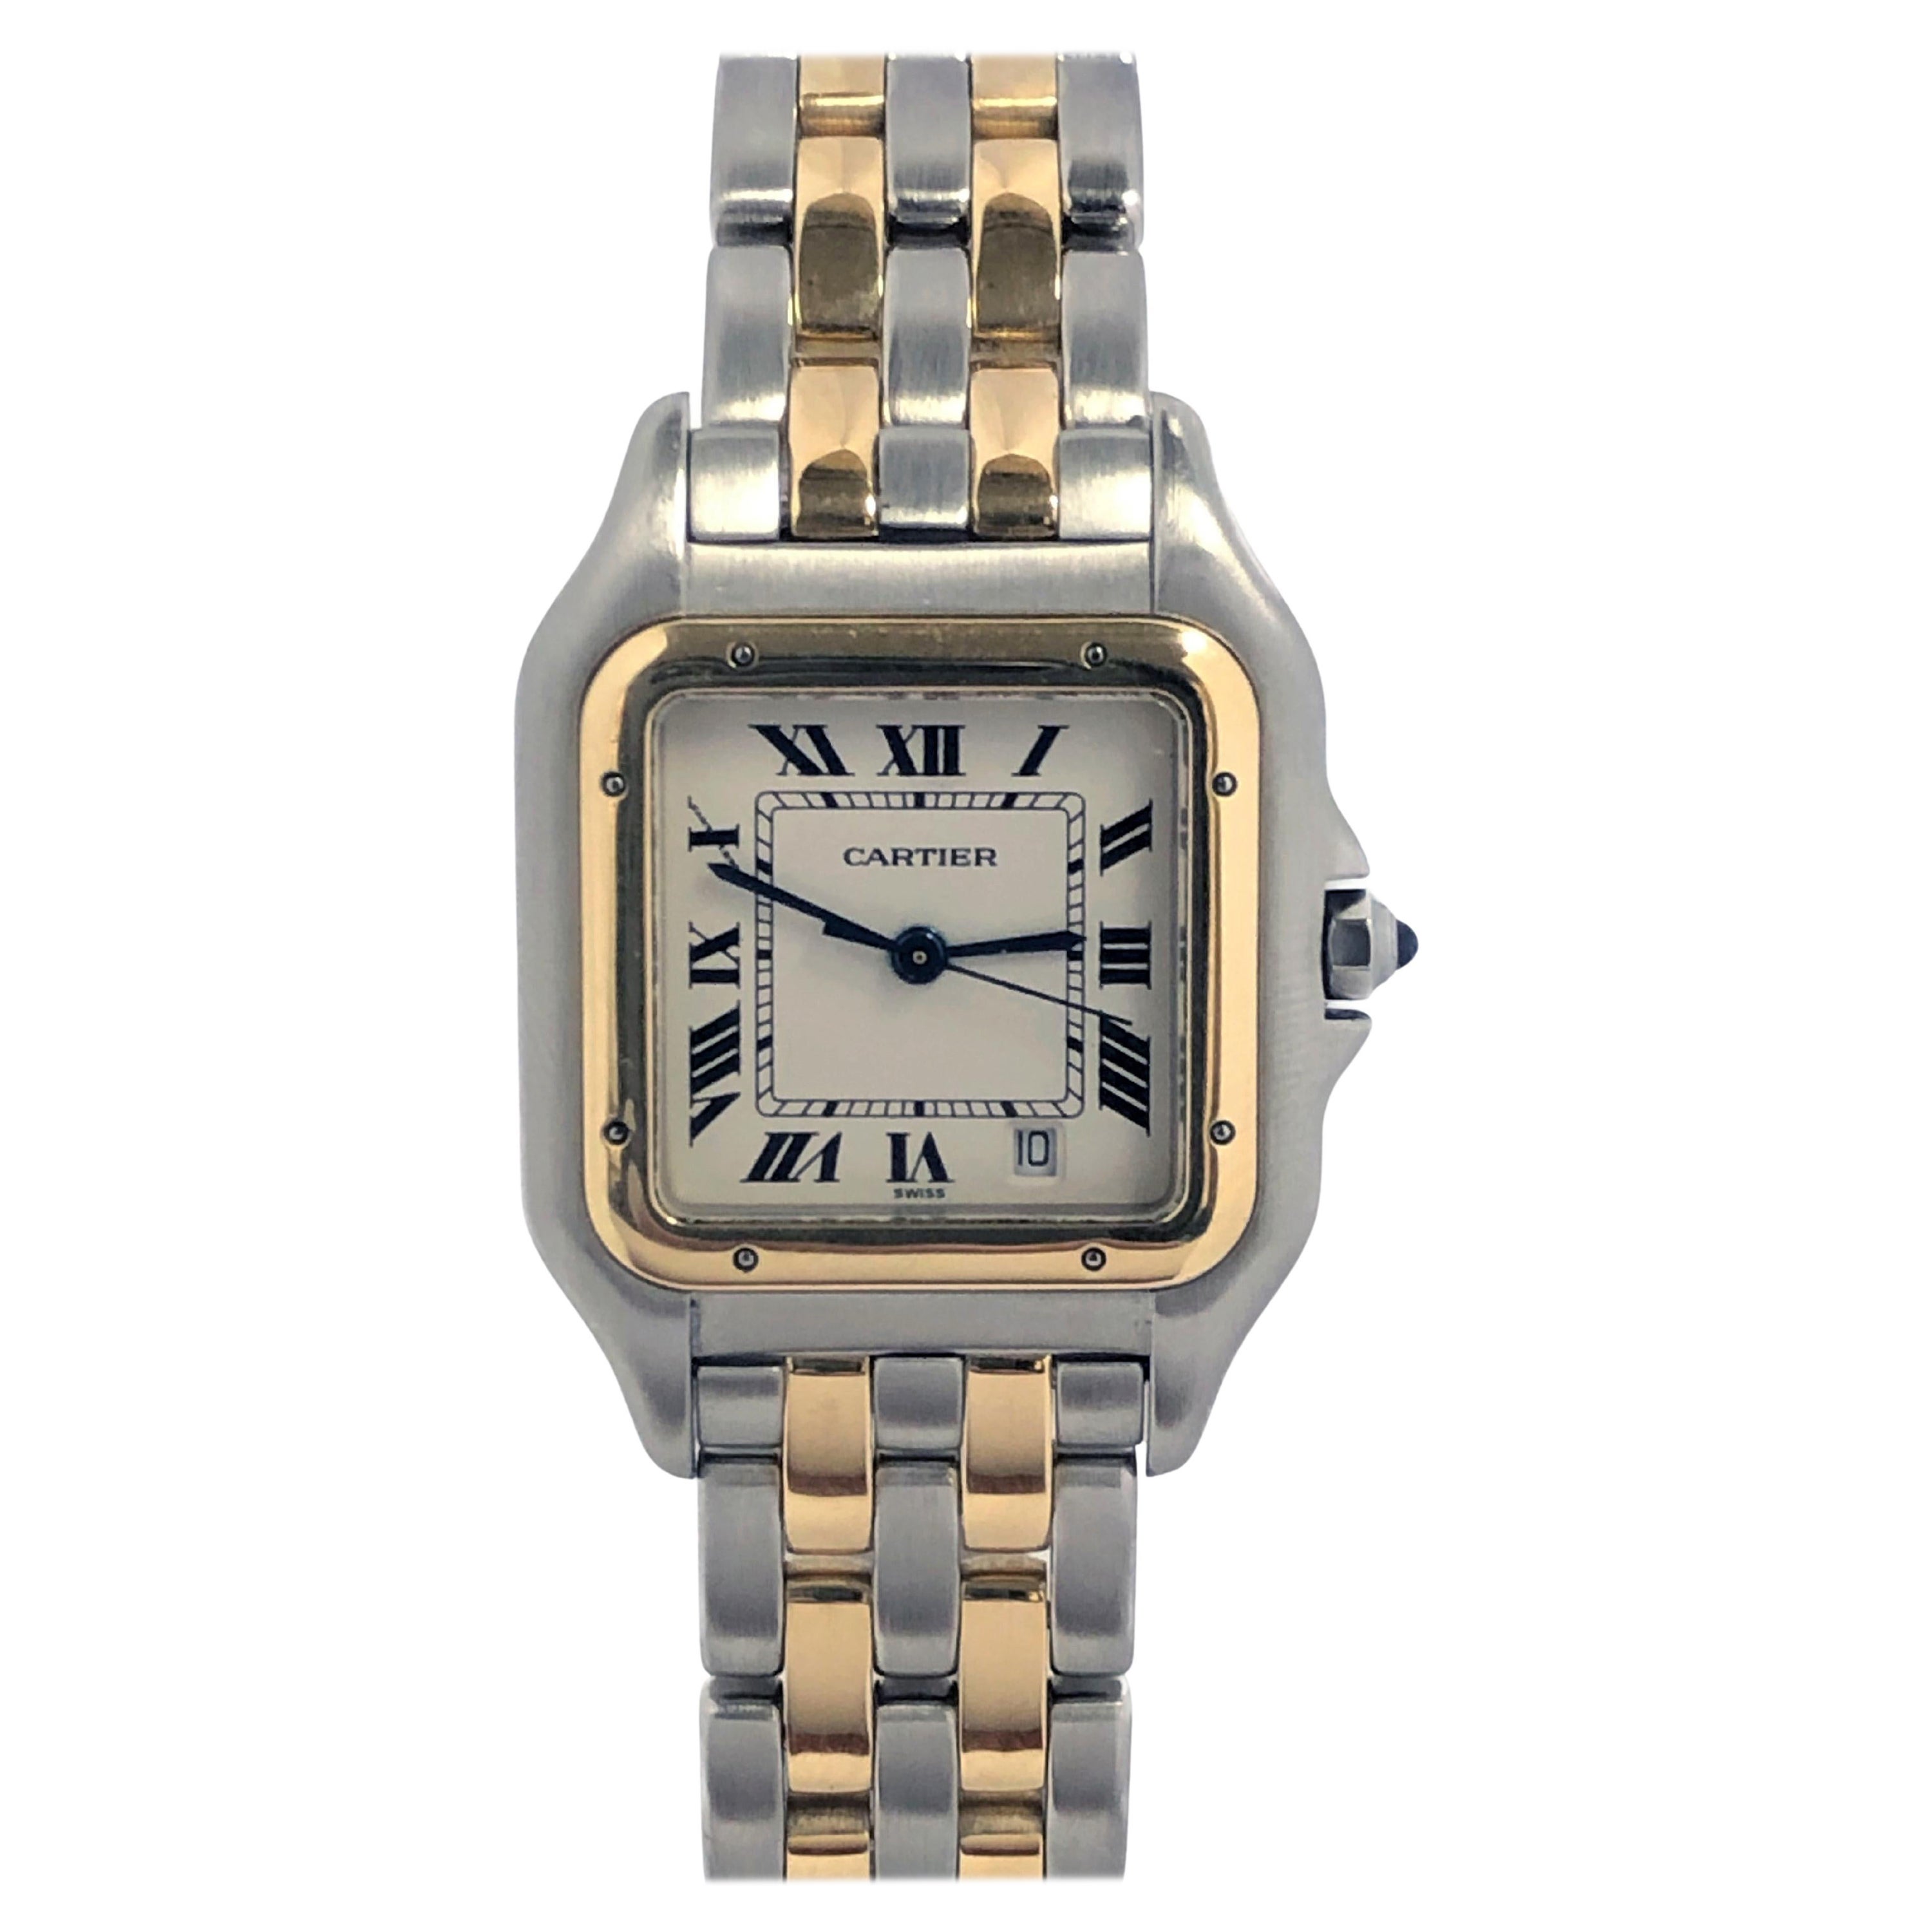 Cartier Panther Gold and Steel Mid Size Quartz Wrist Watch